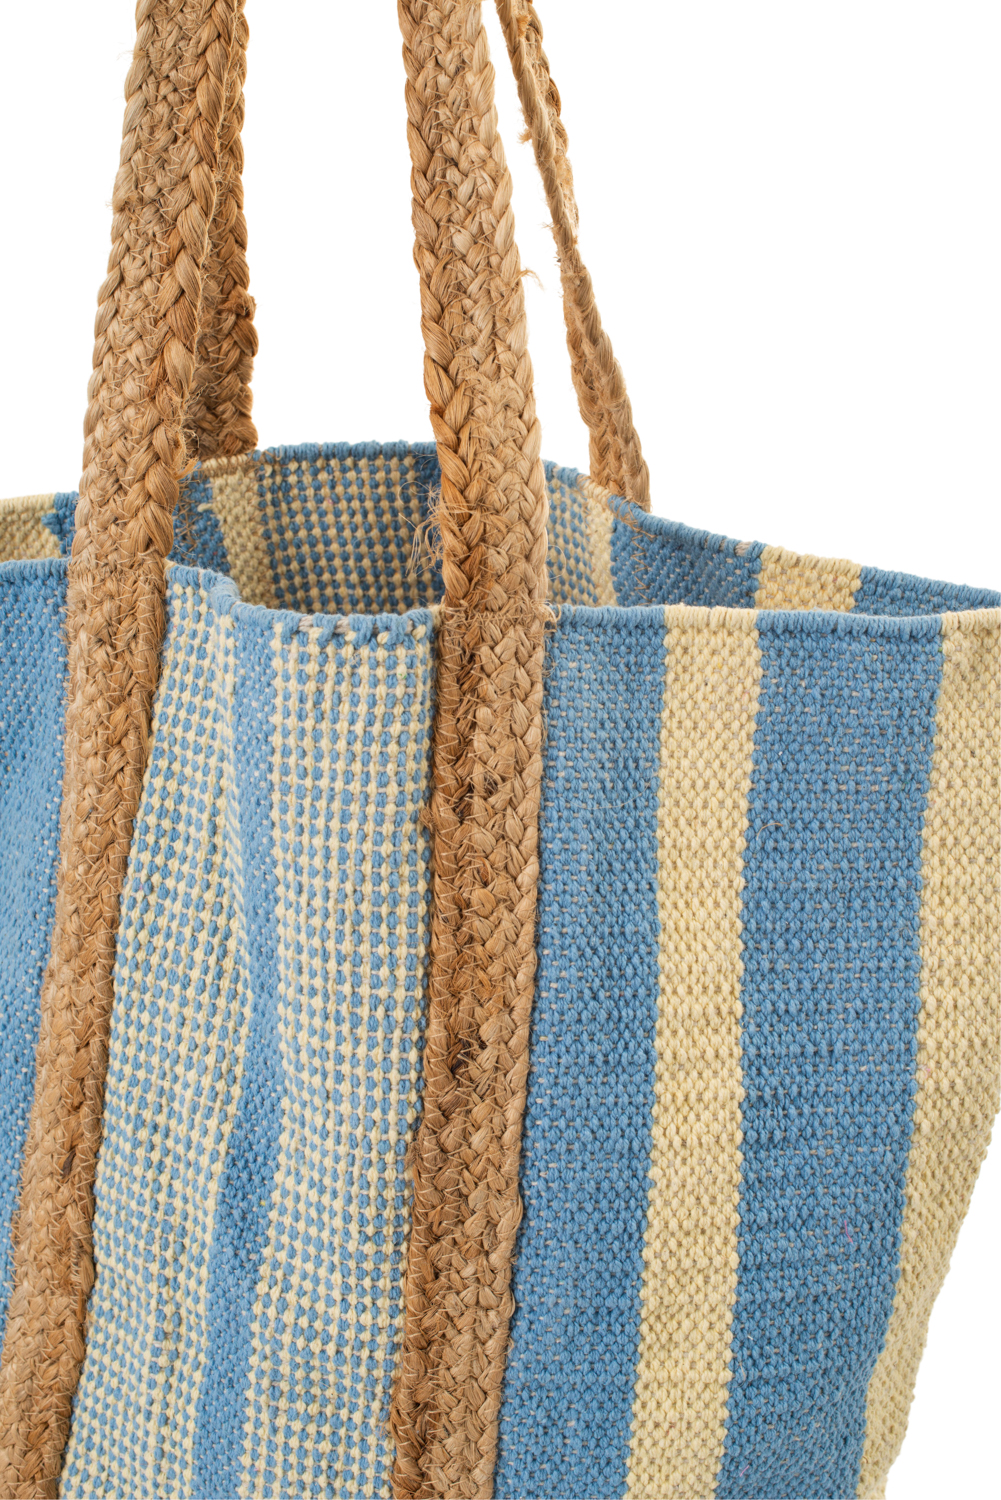 Striped Textured Tote Bag with Woven Raffia Detail